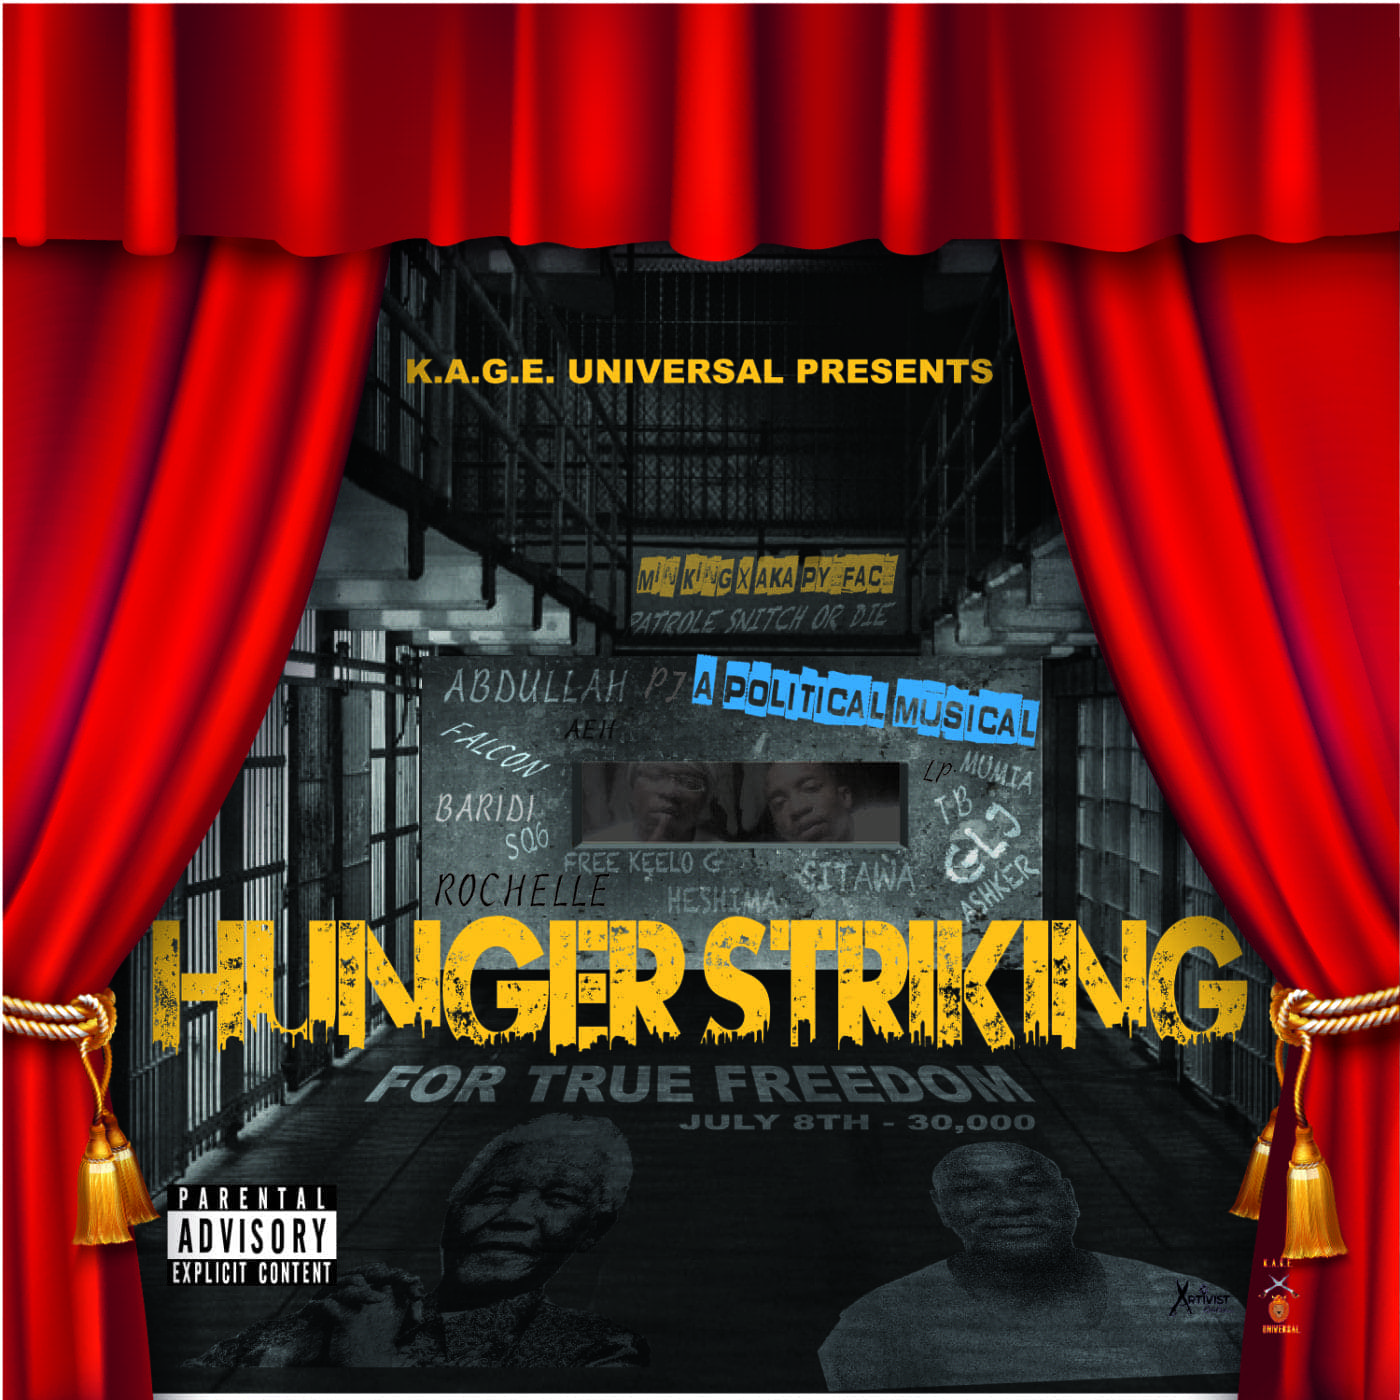 KAGE-Universal-presents-Hunger-Striking-for-True-Freedom-album-cover-1400x1400, Hunger striking for true freedom – statement for a political musical, Behind Enemy Lines 